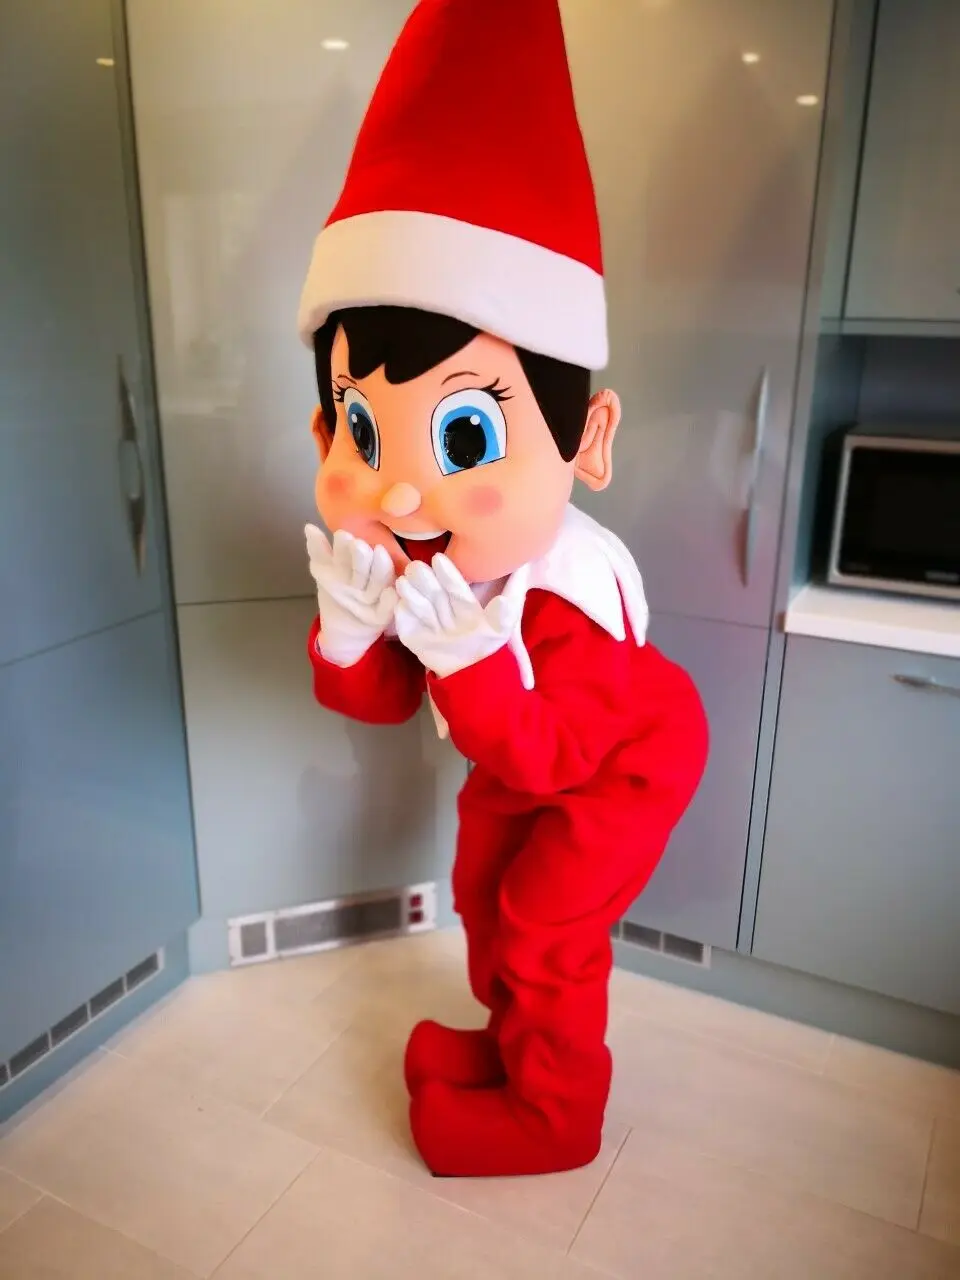 

Nauty Elf Cartoon Adult Size Mascot Costume Fancy Dress Adult Size for Halloween Carnival Party Event Cosplay Performance